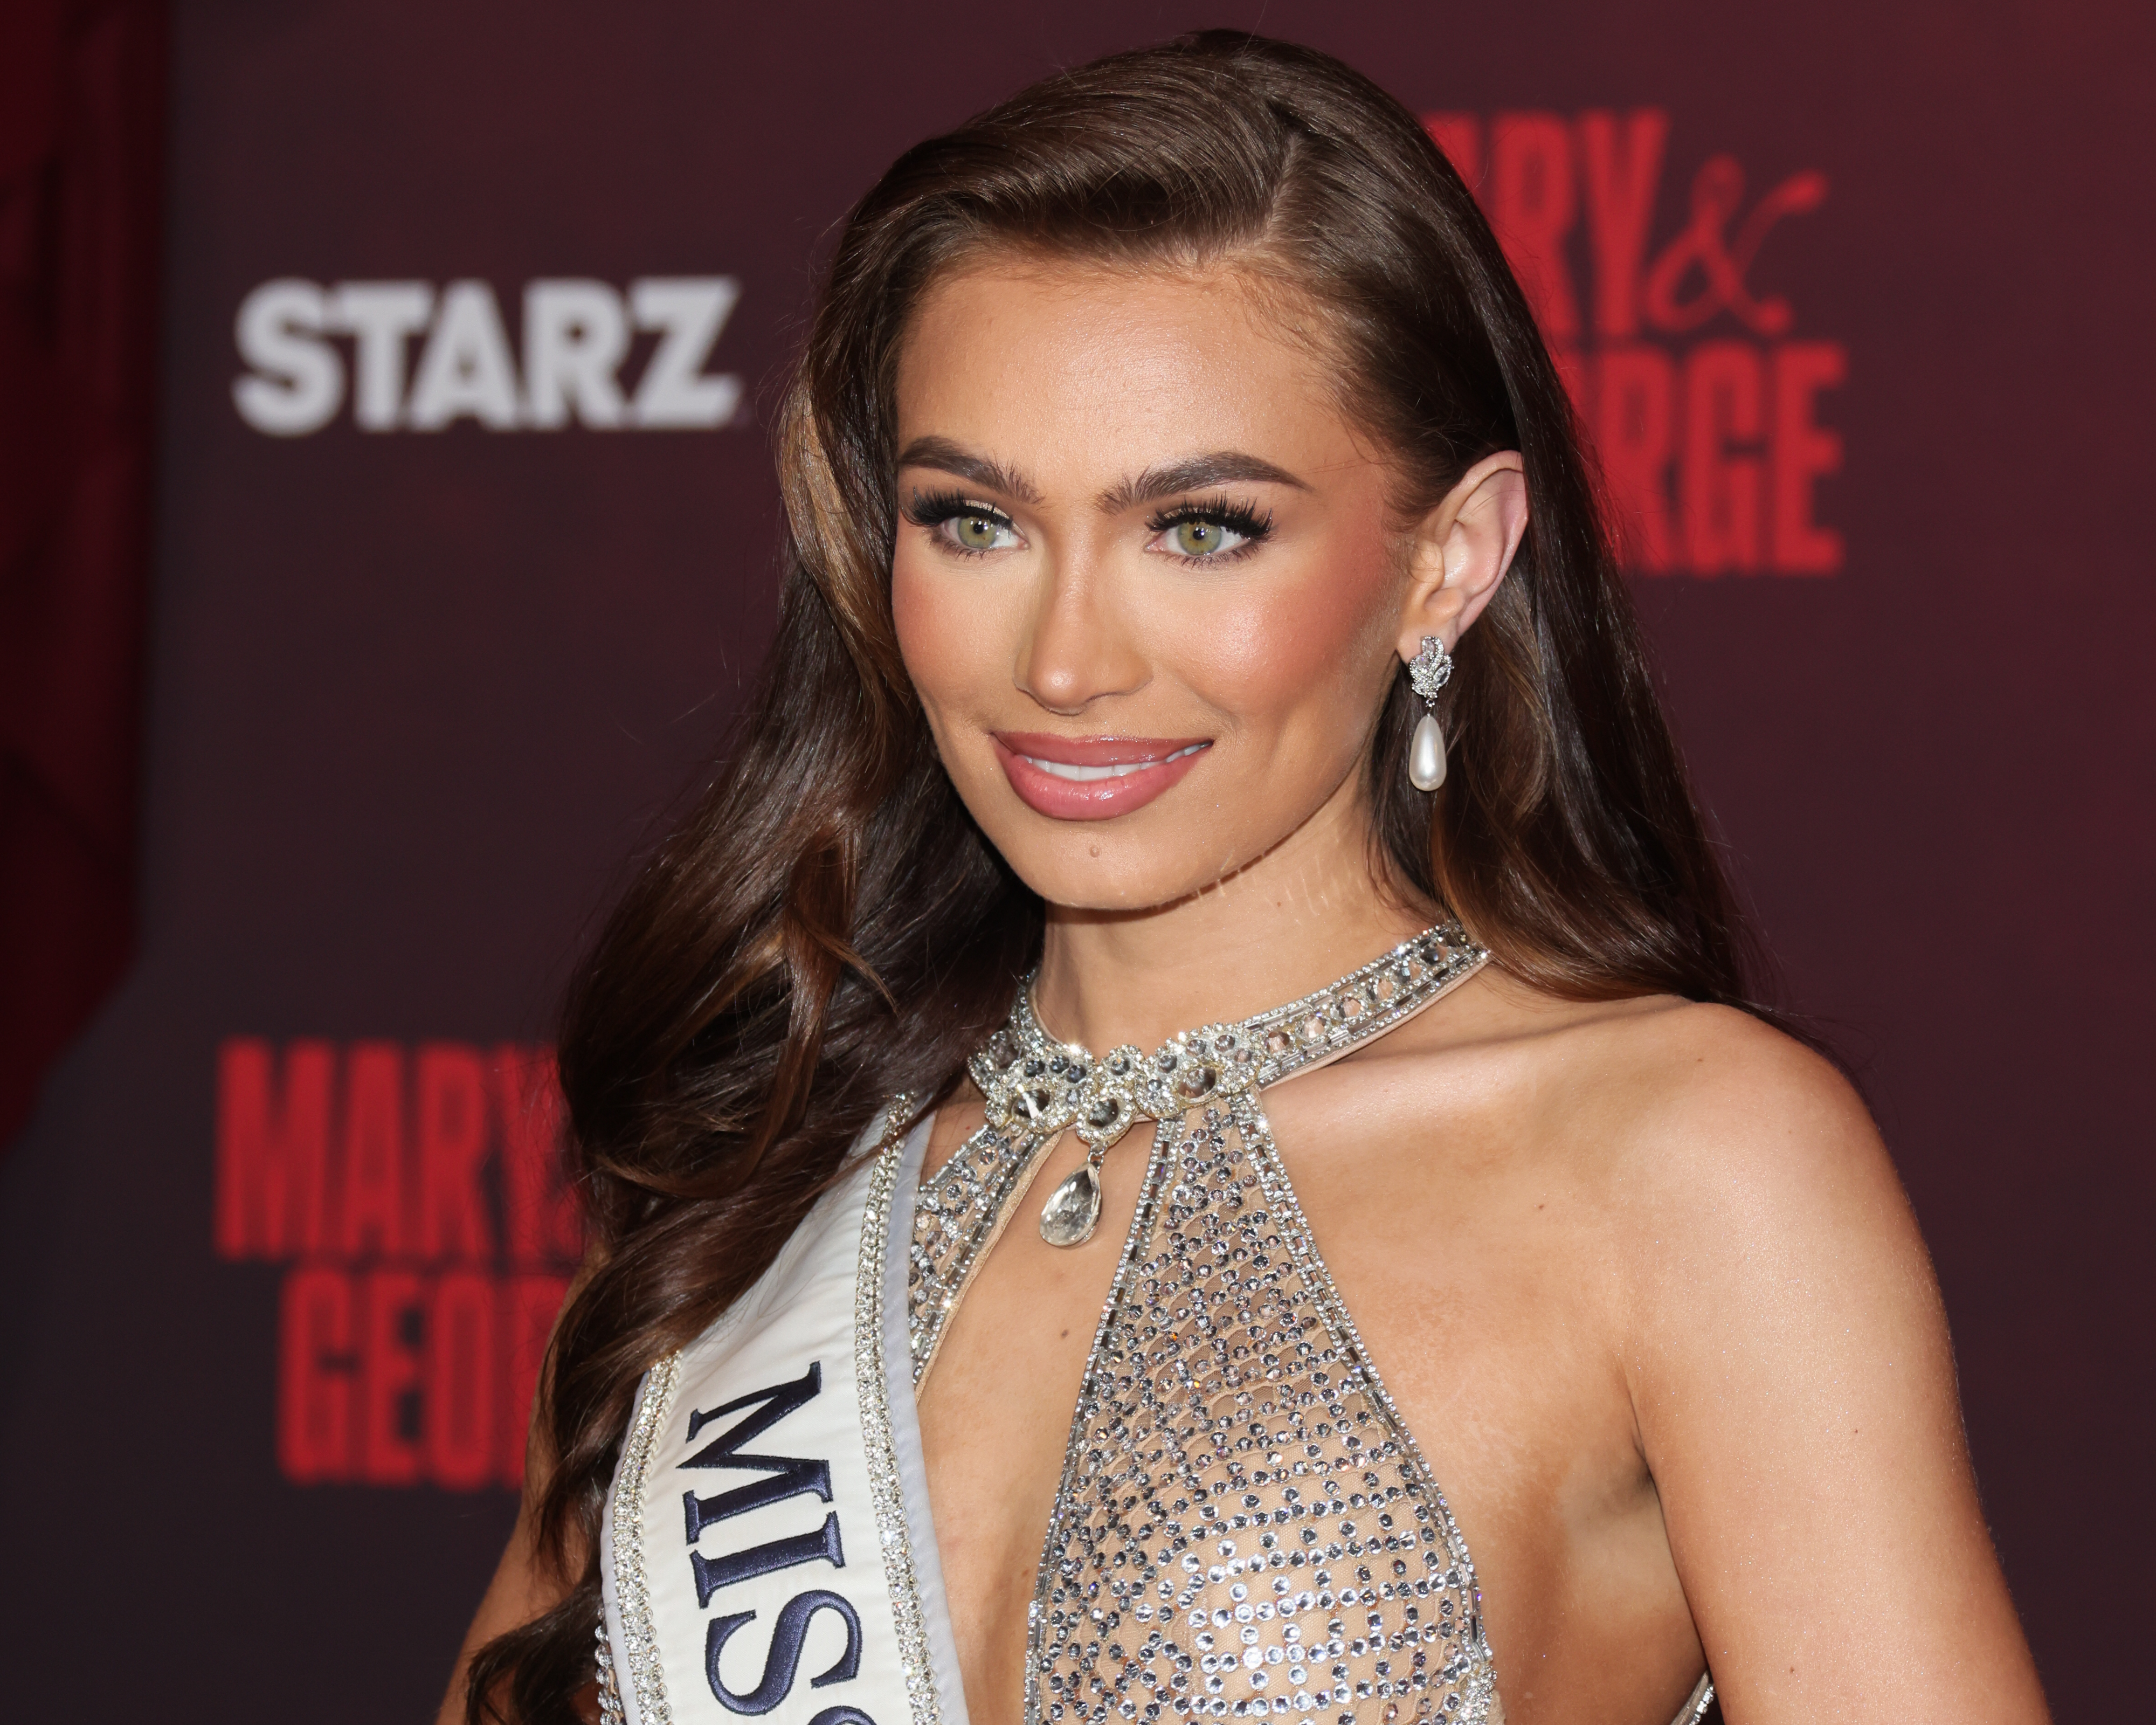 Miss USA 2023 announces she's resigning from title for her mental
health: ‘This may come as a large shock'